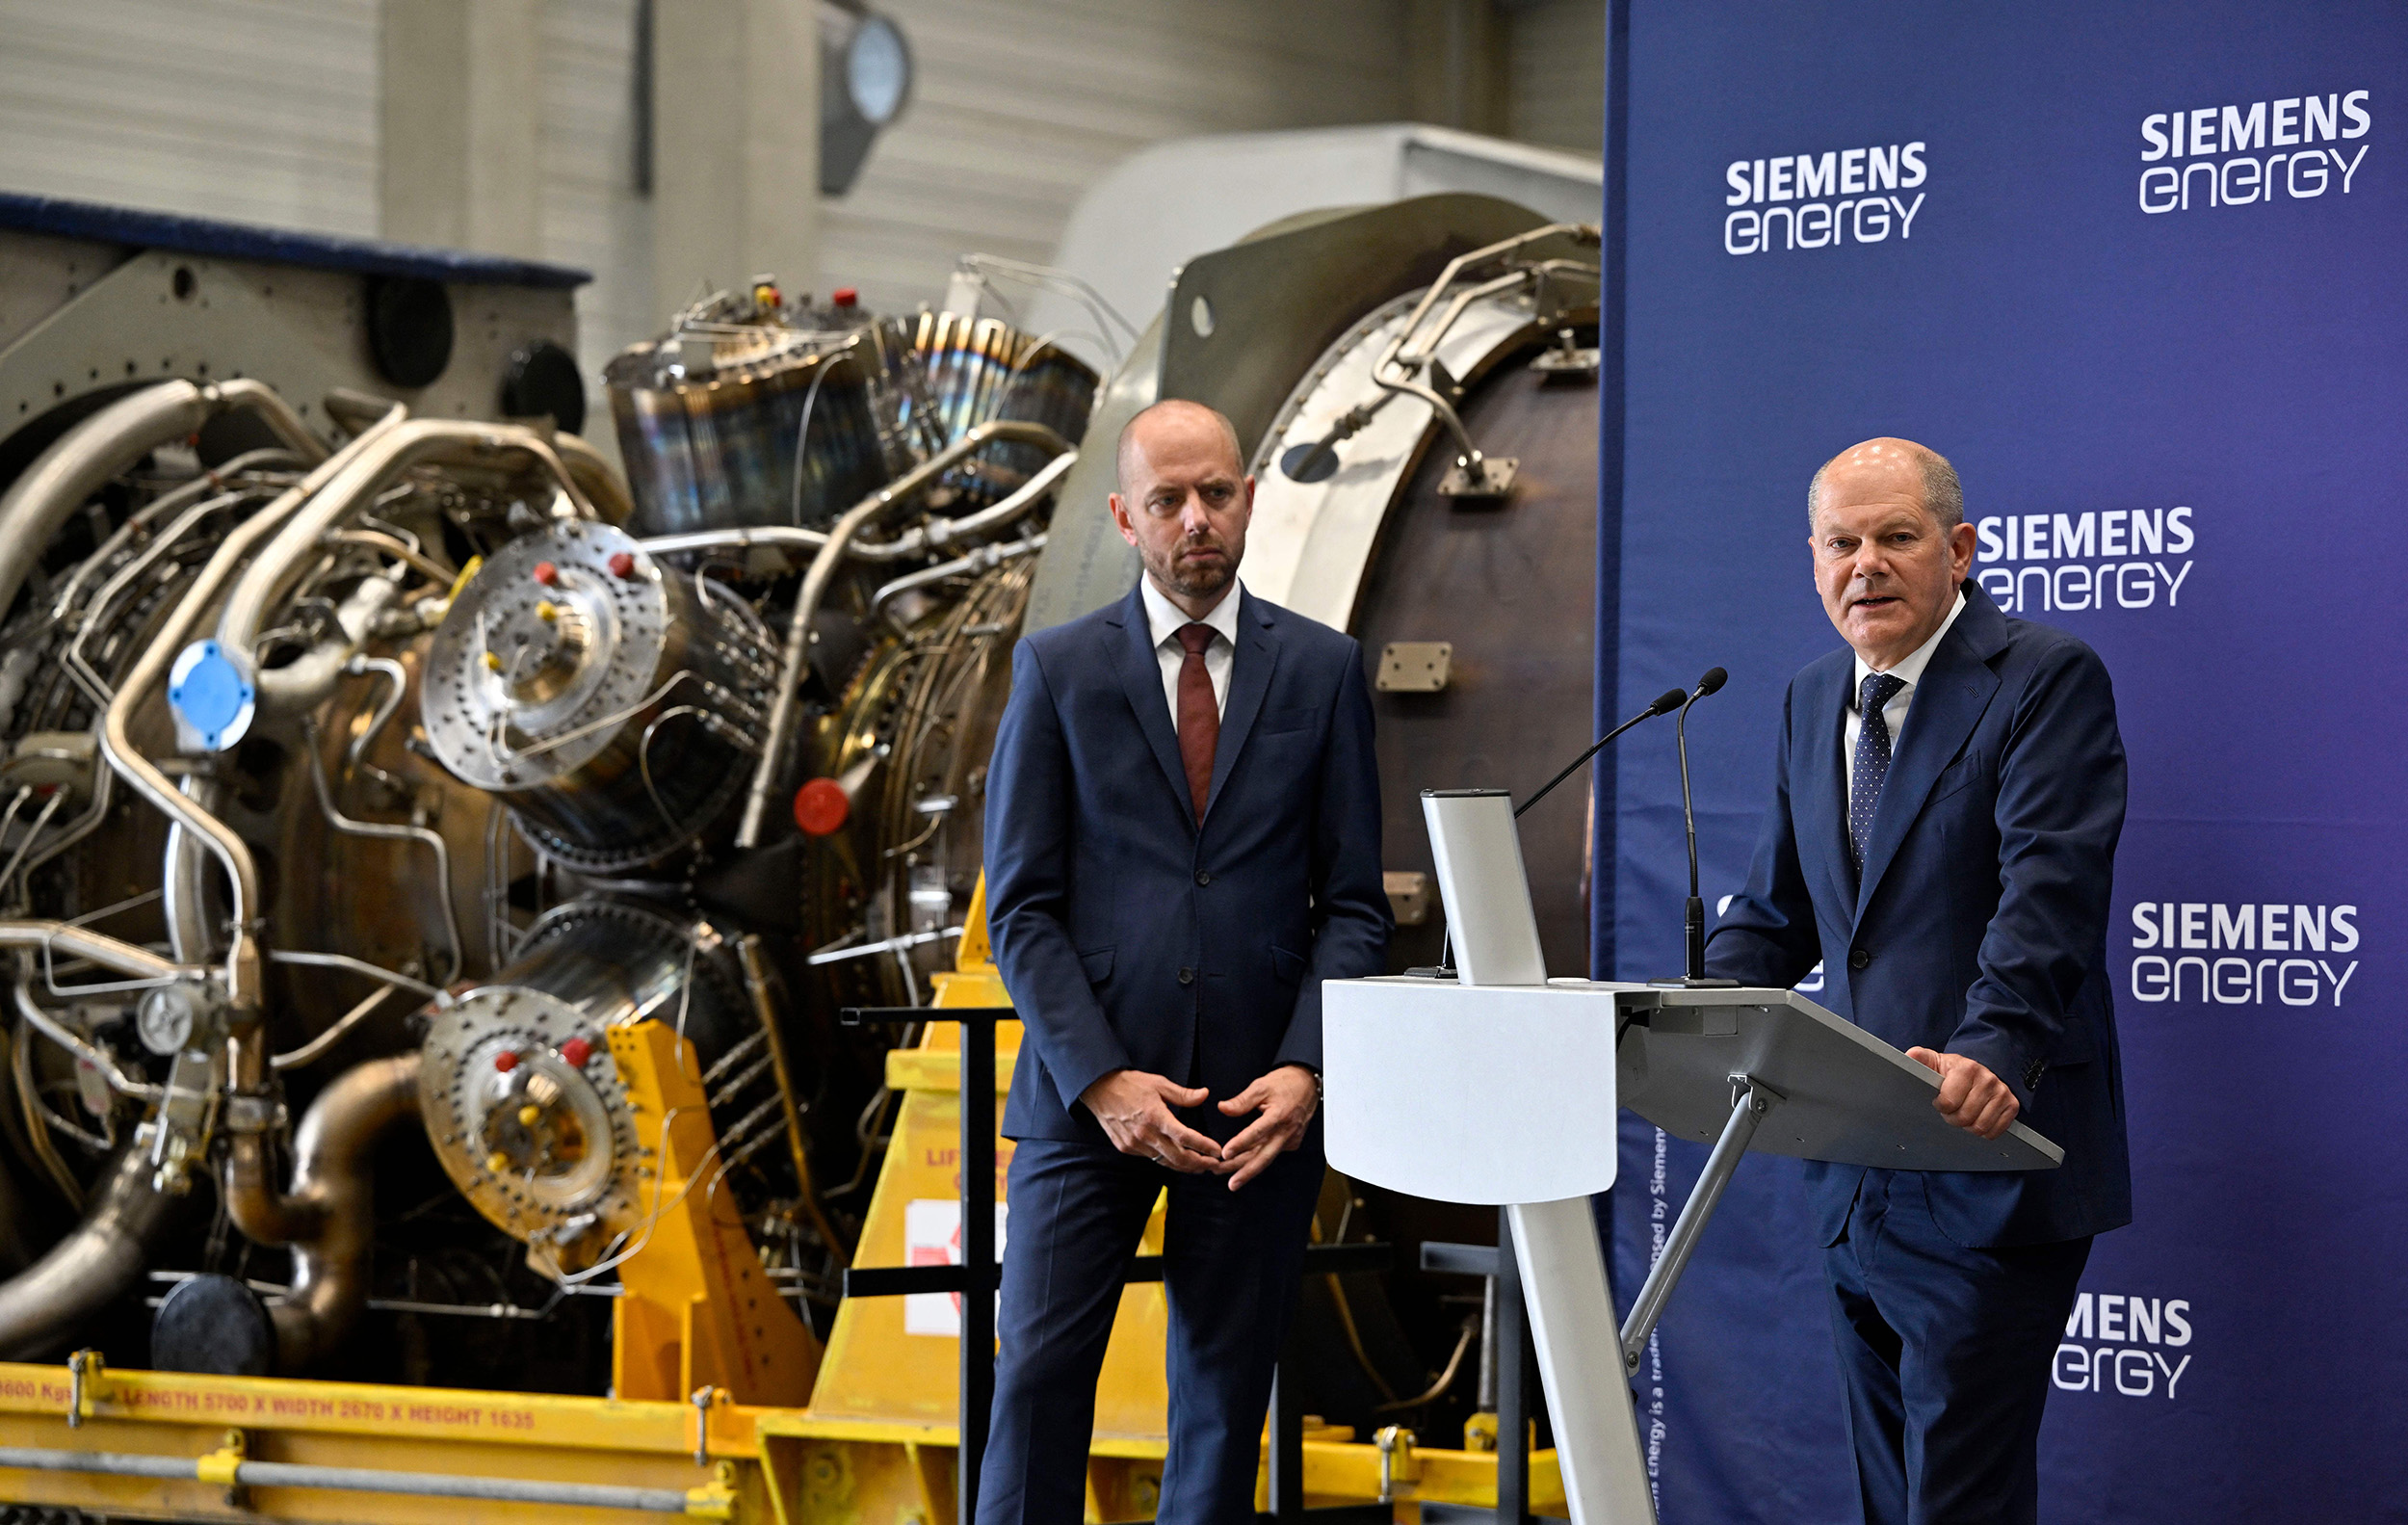 German Chancellor Olaf Scholz, right, stands next to Christian Bruch, President and CEO of Siemens Energy in front of a turbine for the Nord Stream 1 pipeline at the plant of Siemens Energy in Muelheim an der Ruhr, Germany, on August 3.